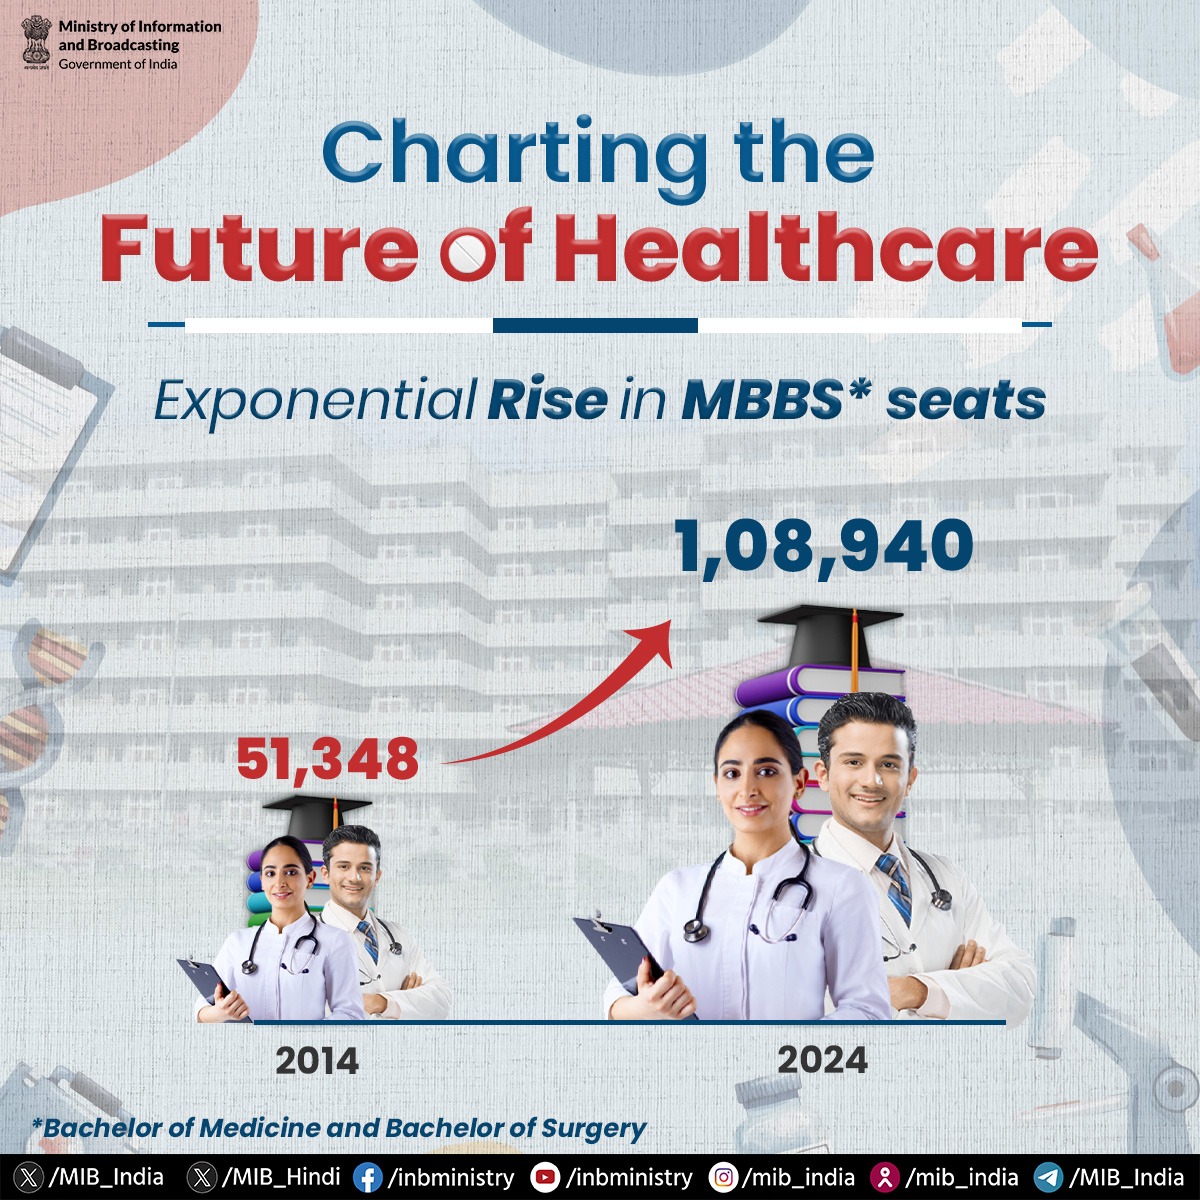 Charting the Future of Healthcare!🏥🇮🇳🩺 ➡️MBBS seats have witnessed an exponential rise in the last 10 years: 🔷2014: 51,348 🔷2024: 1,08,940 #WednesdayDatawatch @PMOIndia @MoHFW_INDIA @mansukhmandviya @OfficeOf_MM